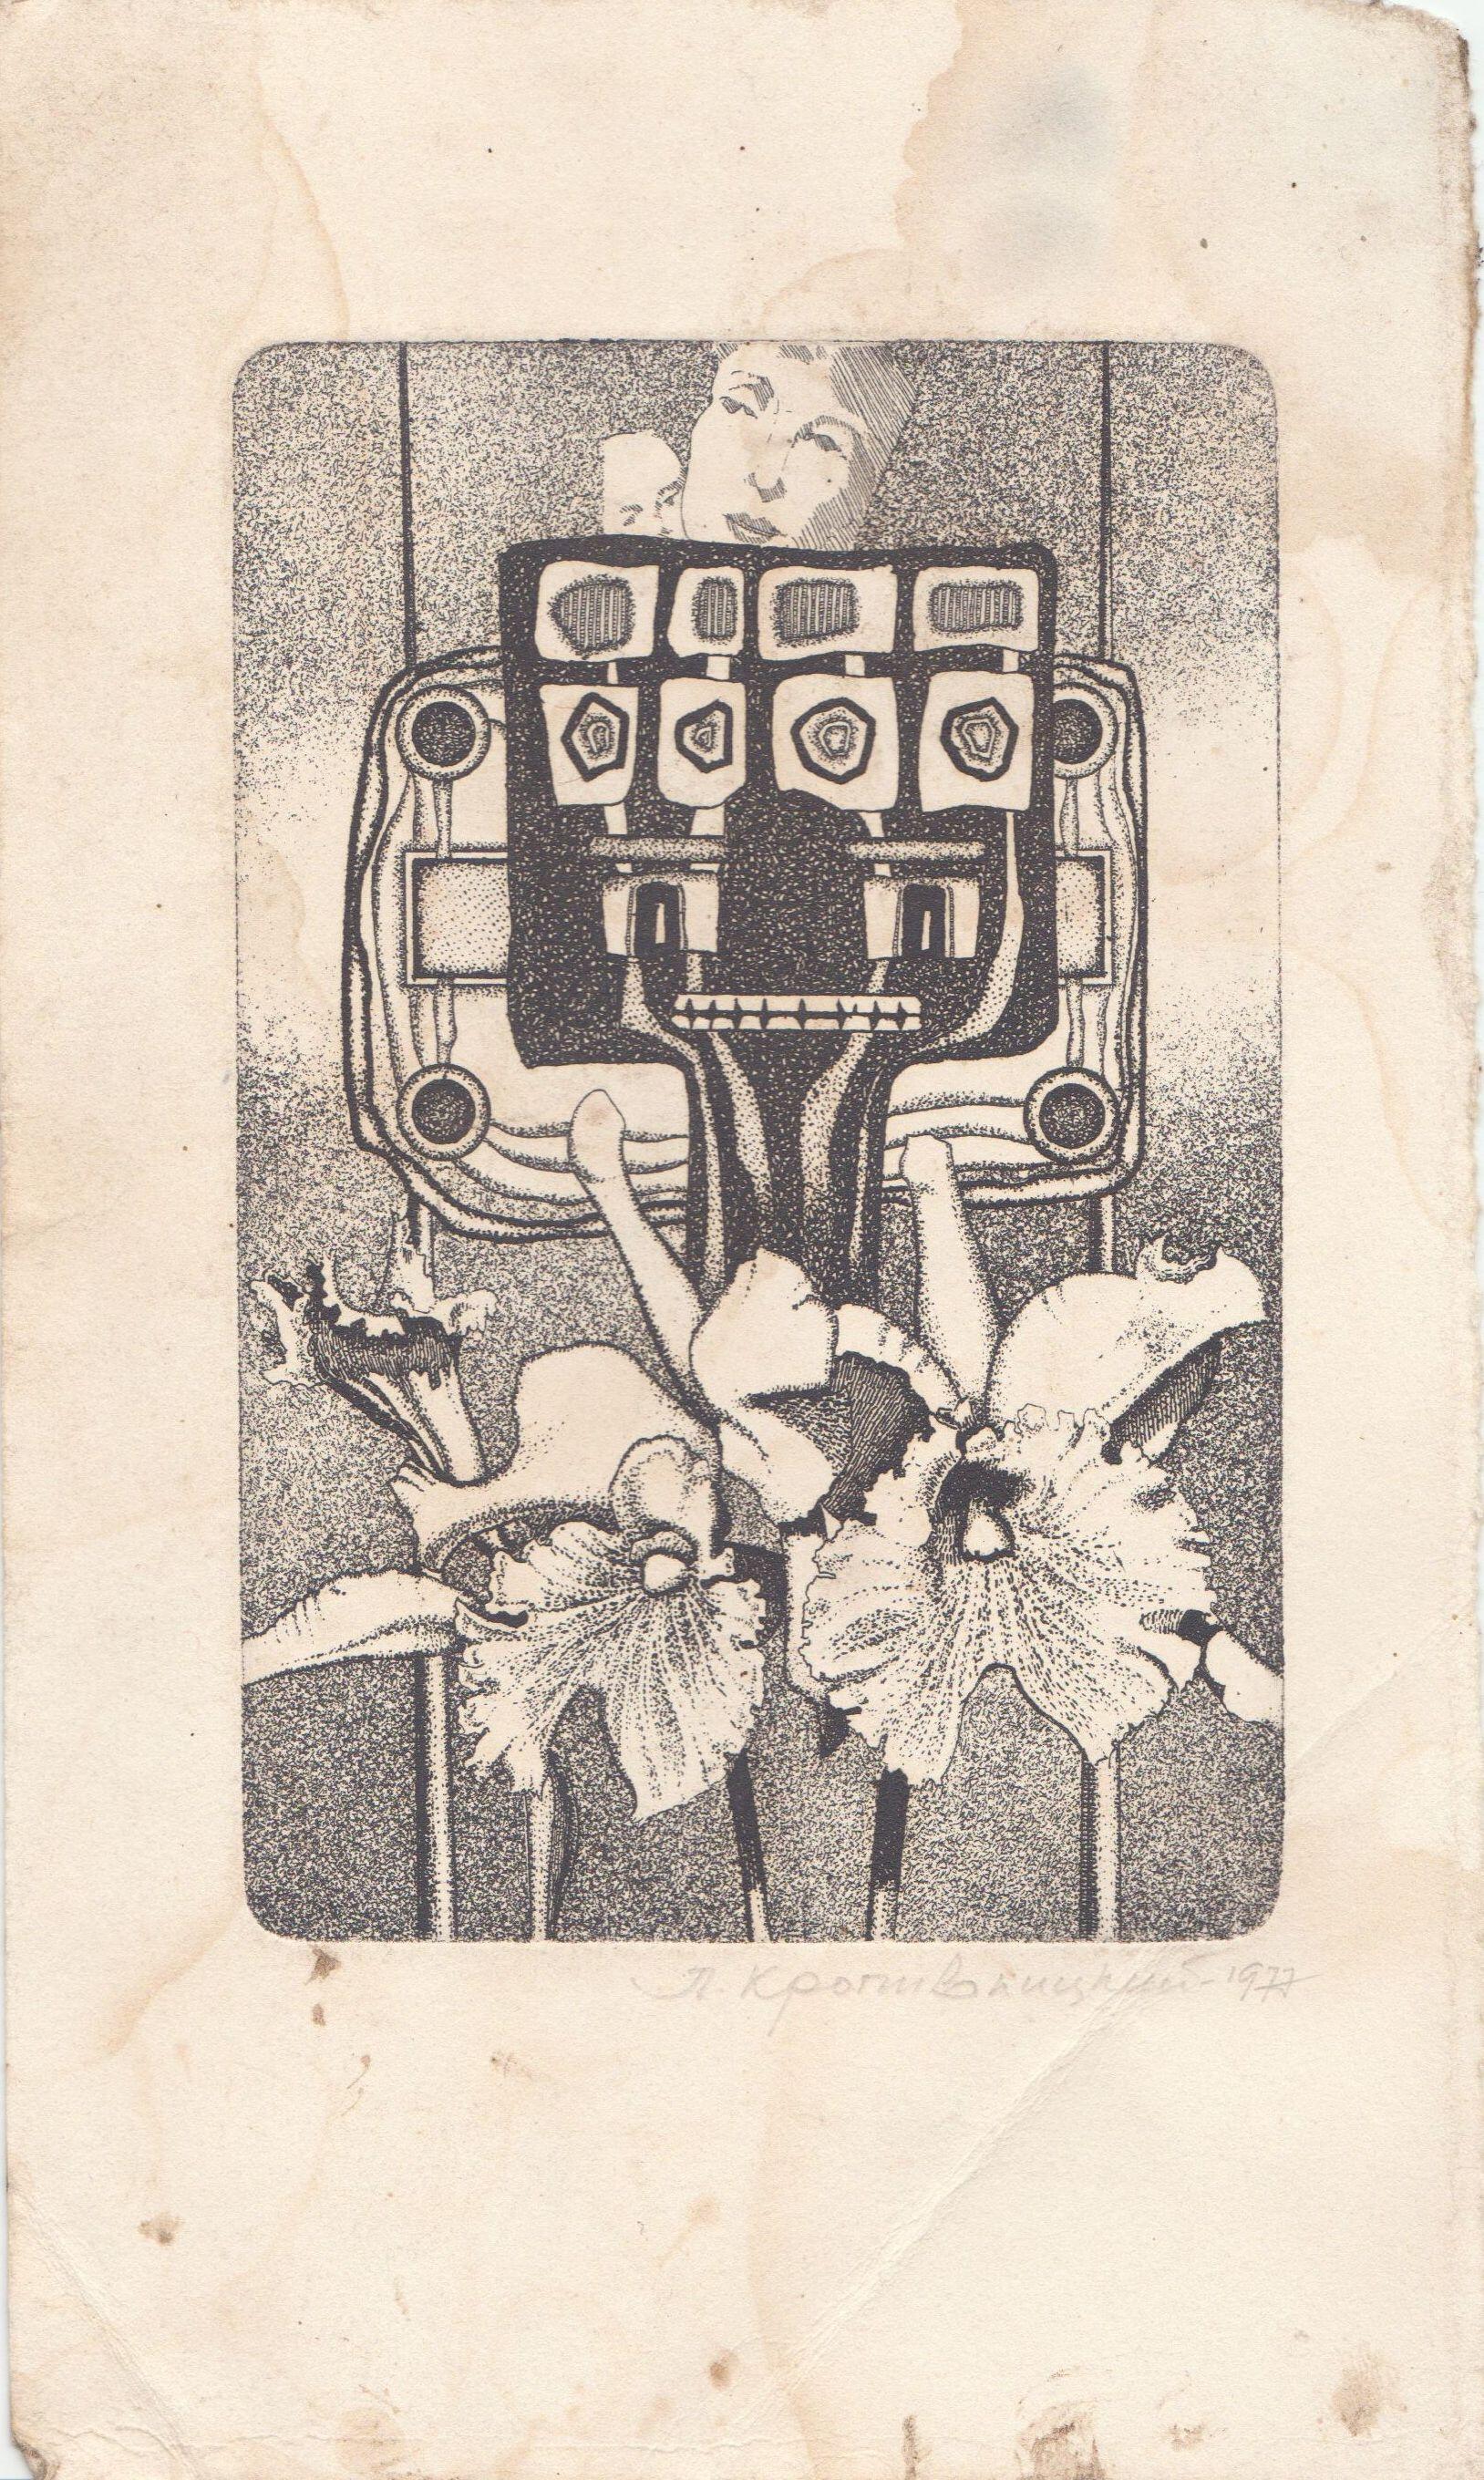 Robot and orchids. 1977, paper, etching, 16x10 cm - Print by Lev Kropivnitsky